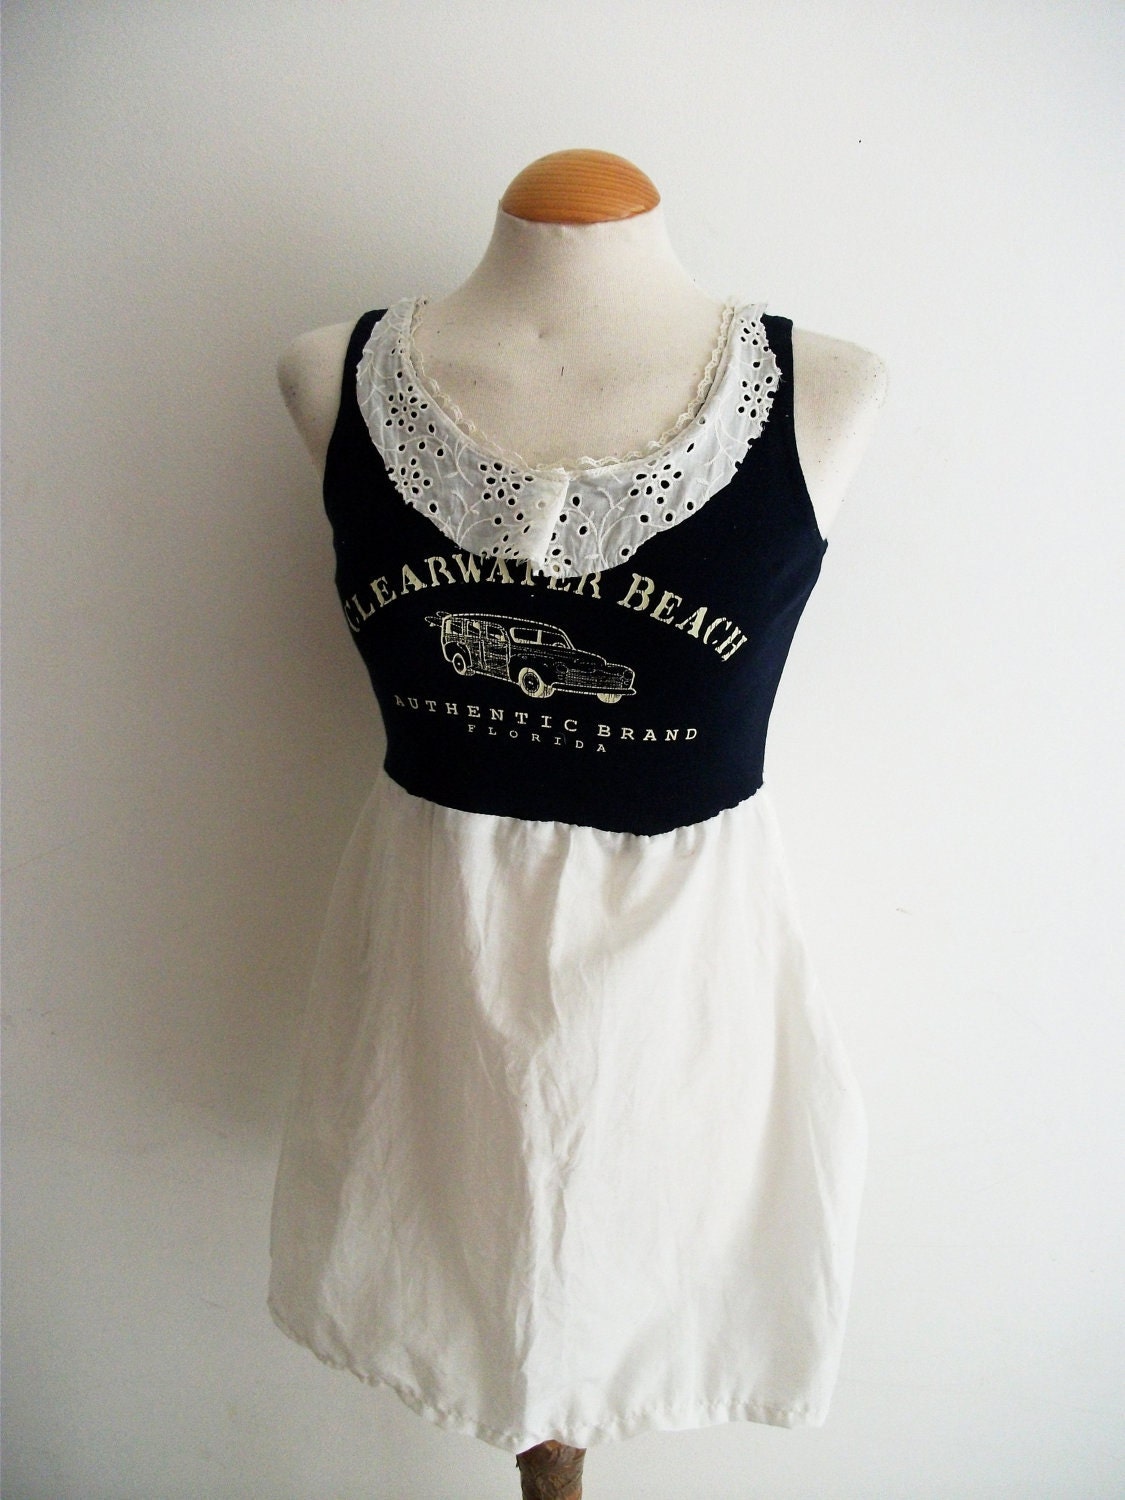 Navy and White Clearwater Beach Babydoll Dress/Top